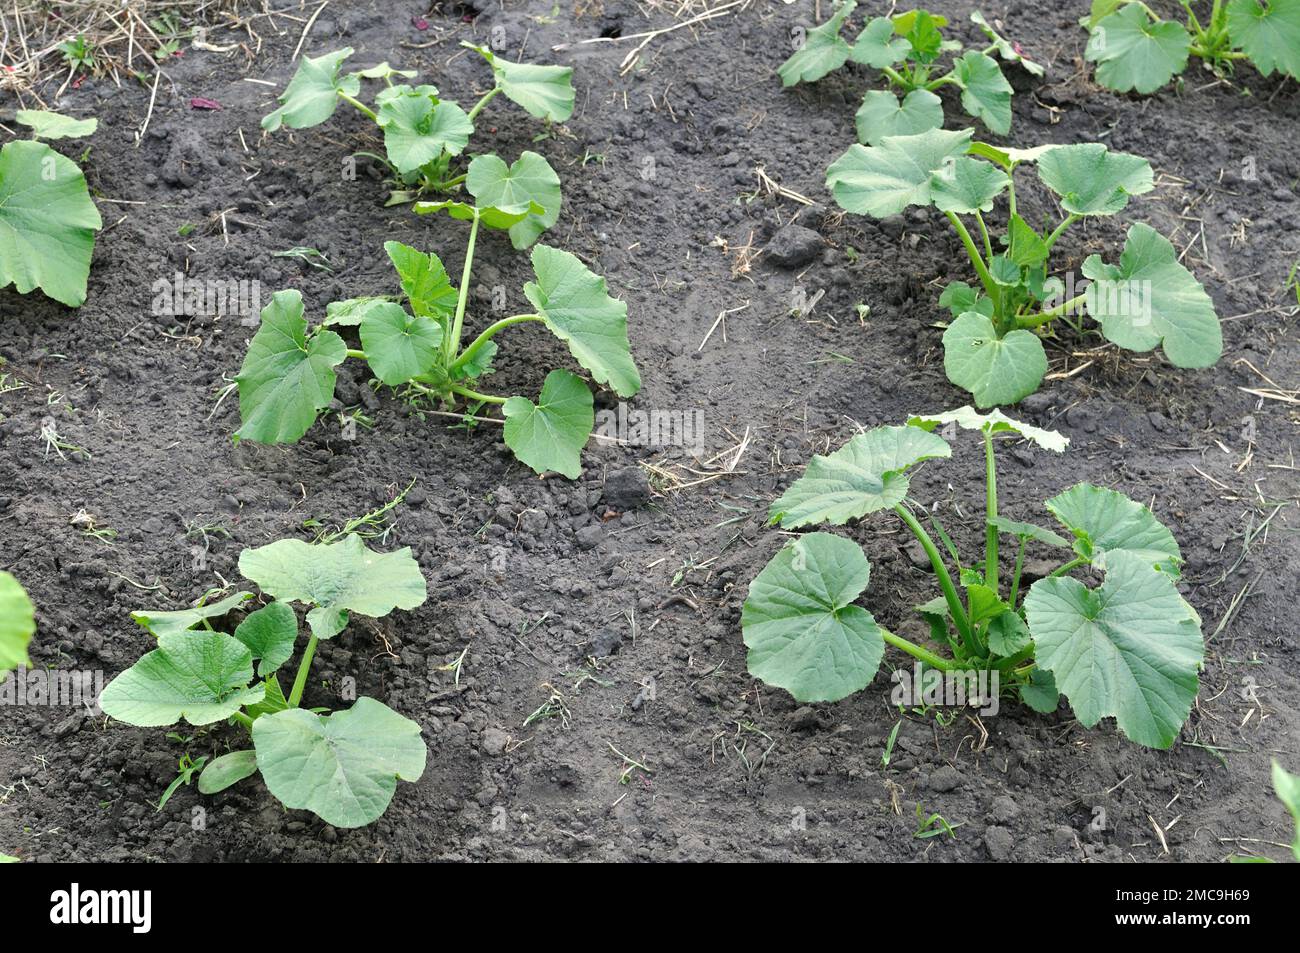 close-up of growing young plants of the vegetable marrow in the vegetable garden, view from above Stock Photo